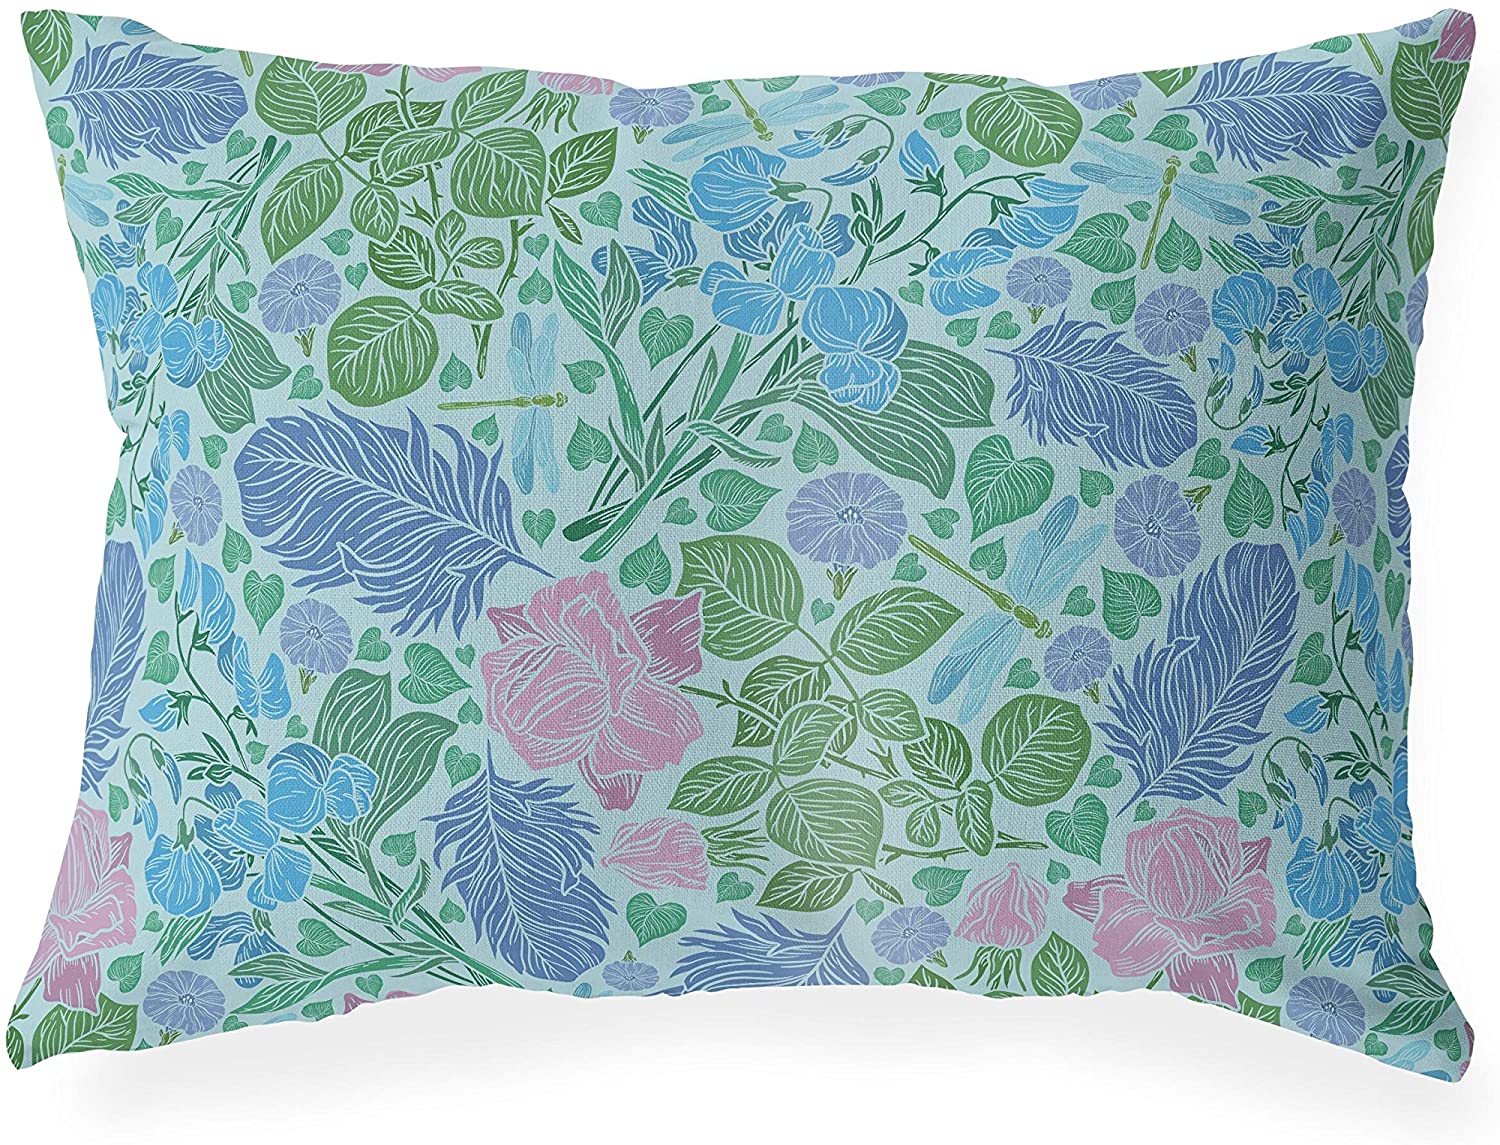 UKN Blue Lumbar Pillow Blue Floral Modern Contemporary Polyester Single Removable Cover